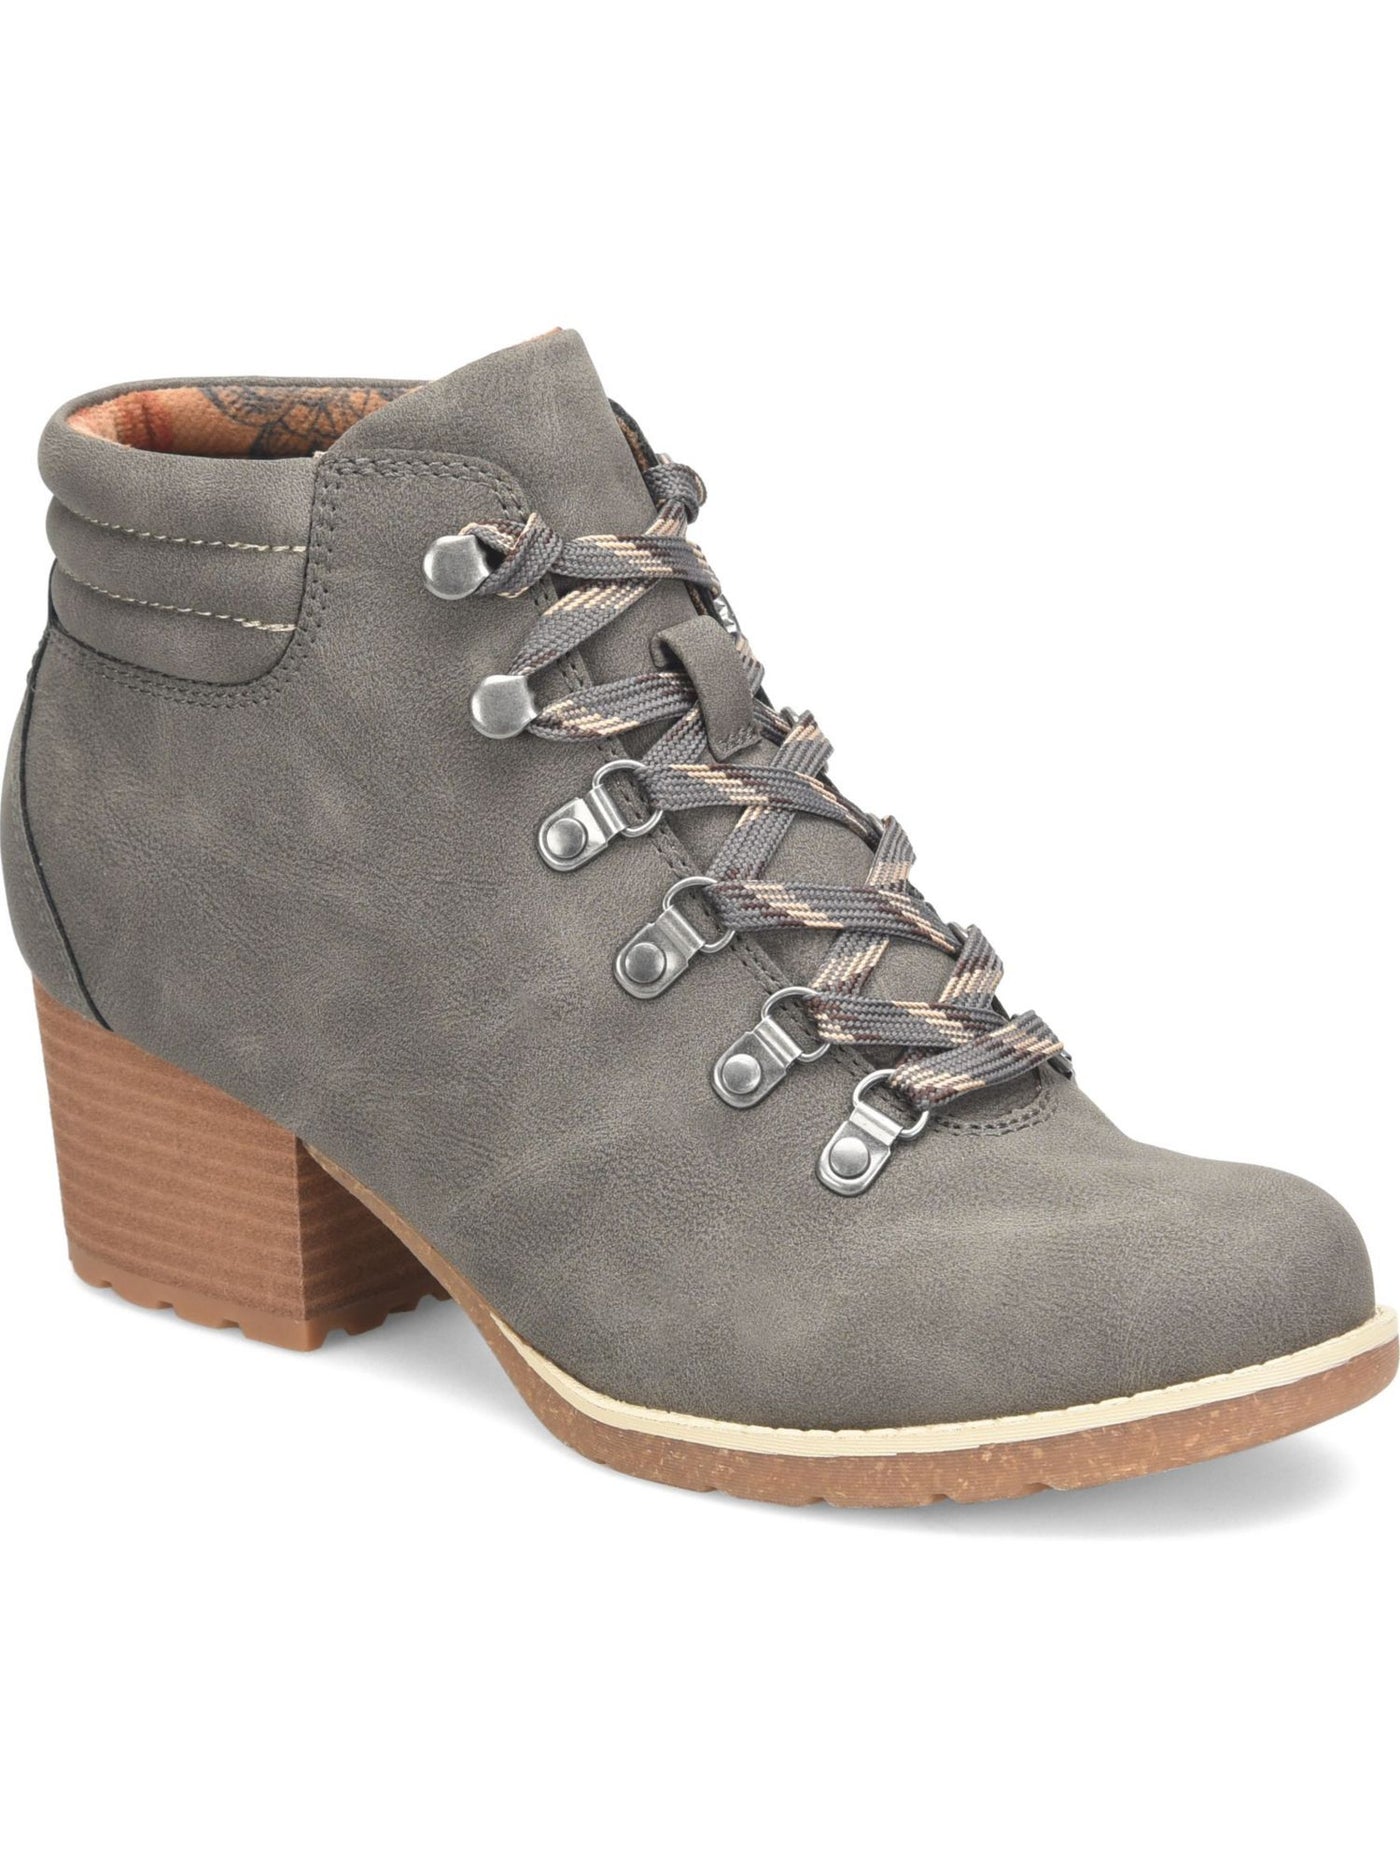 BOC Womens Gray Floral Inside Padded Cuff Hiker-Inspired Cushioned Alder Round Toe Block Heel Lace-Up Booties 9.5 M